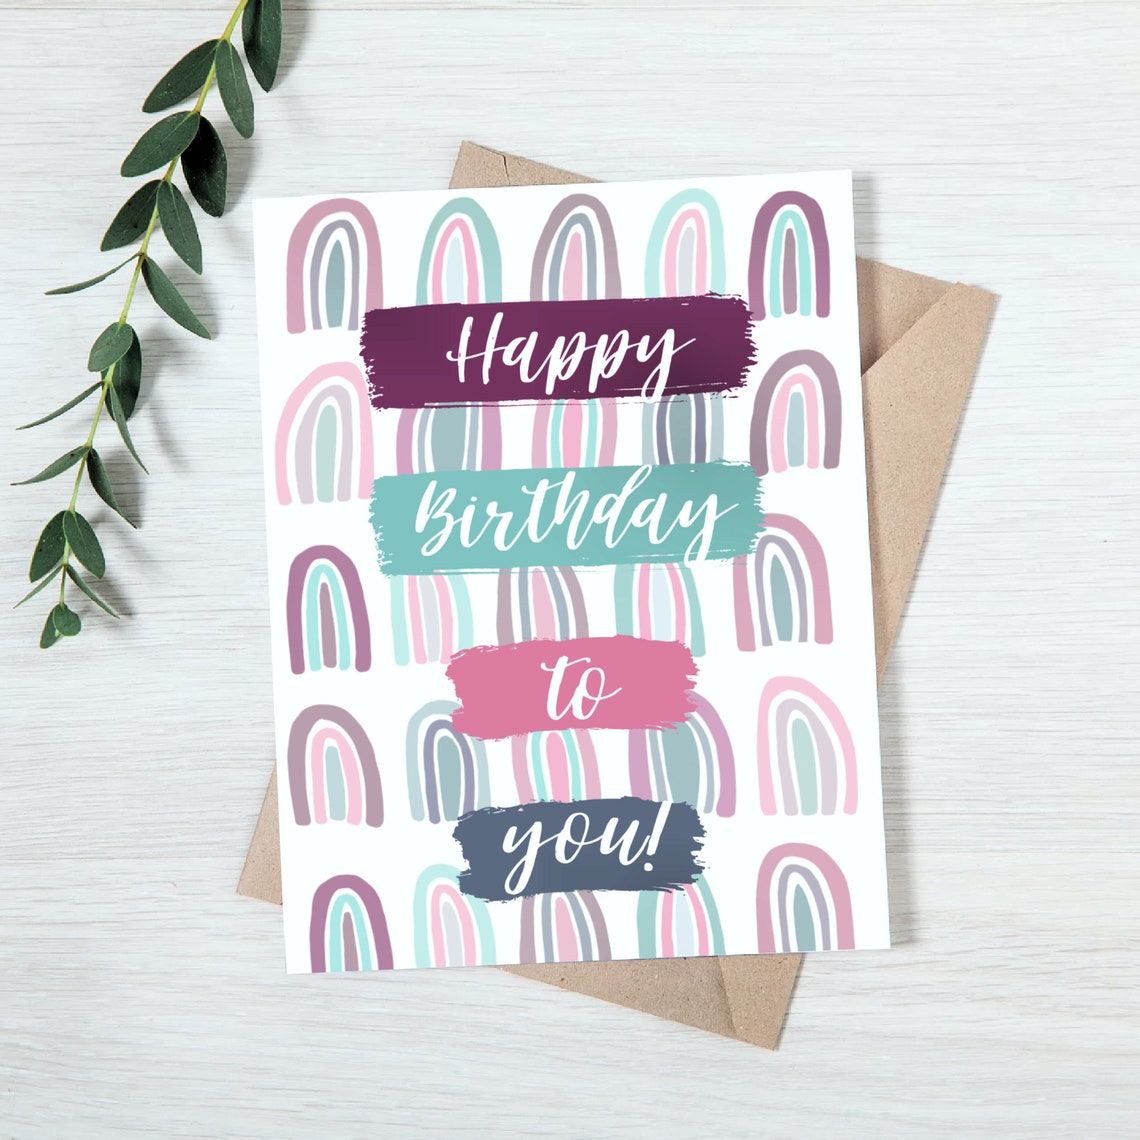 Set of 8 Printable All Occasion Cards Instant Download | Etsy